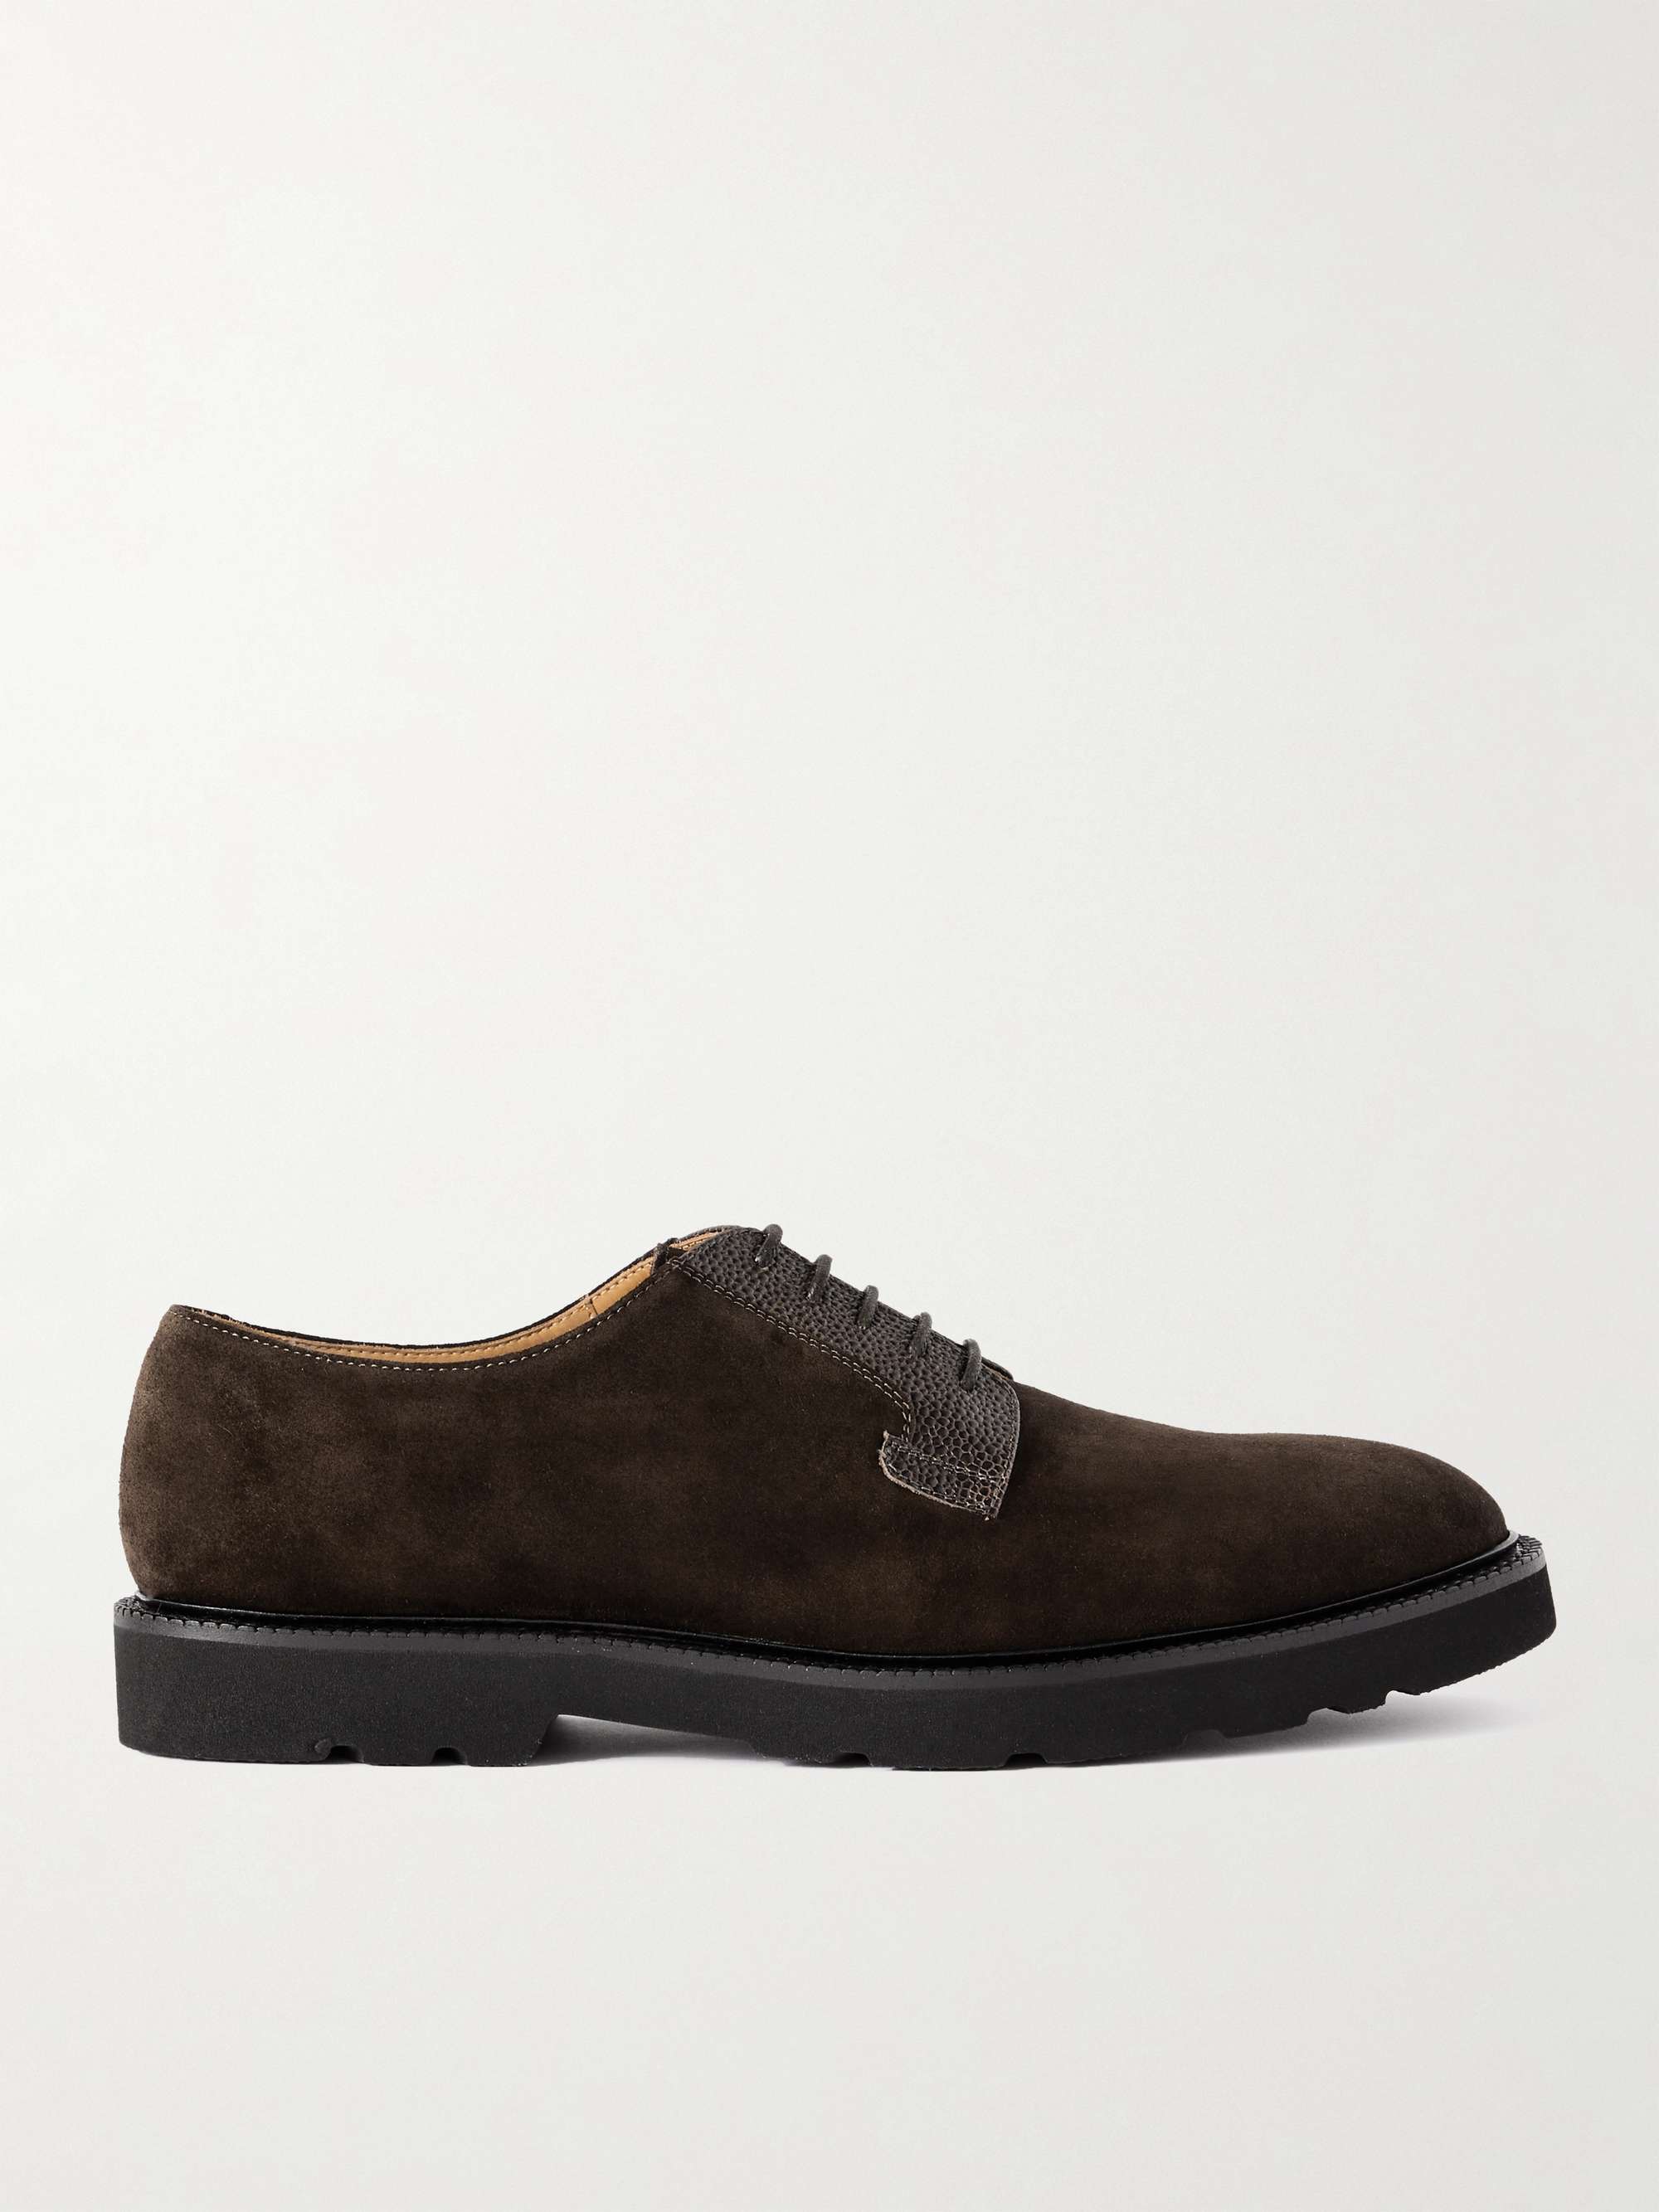 PAUL SMITH Pebbled Leather-Trimmed Suede Derby Shoes for Men | MR PORTER